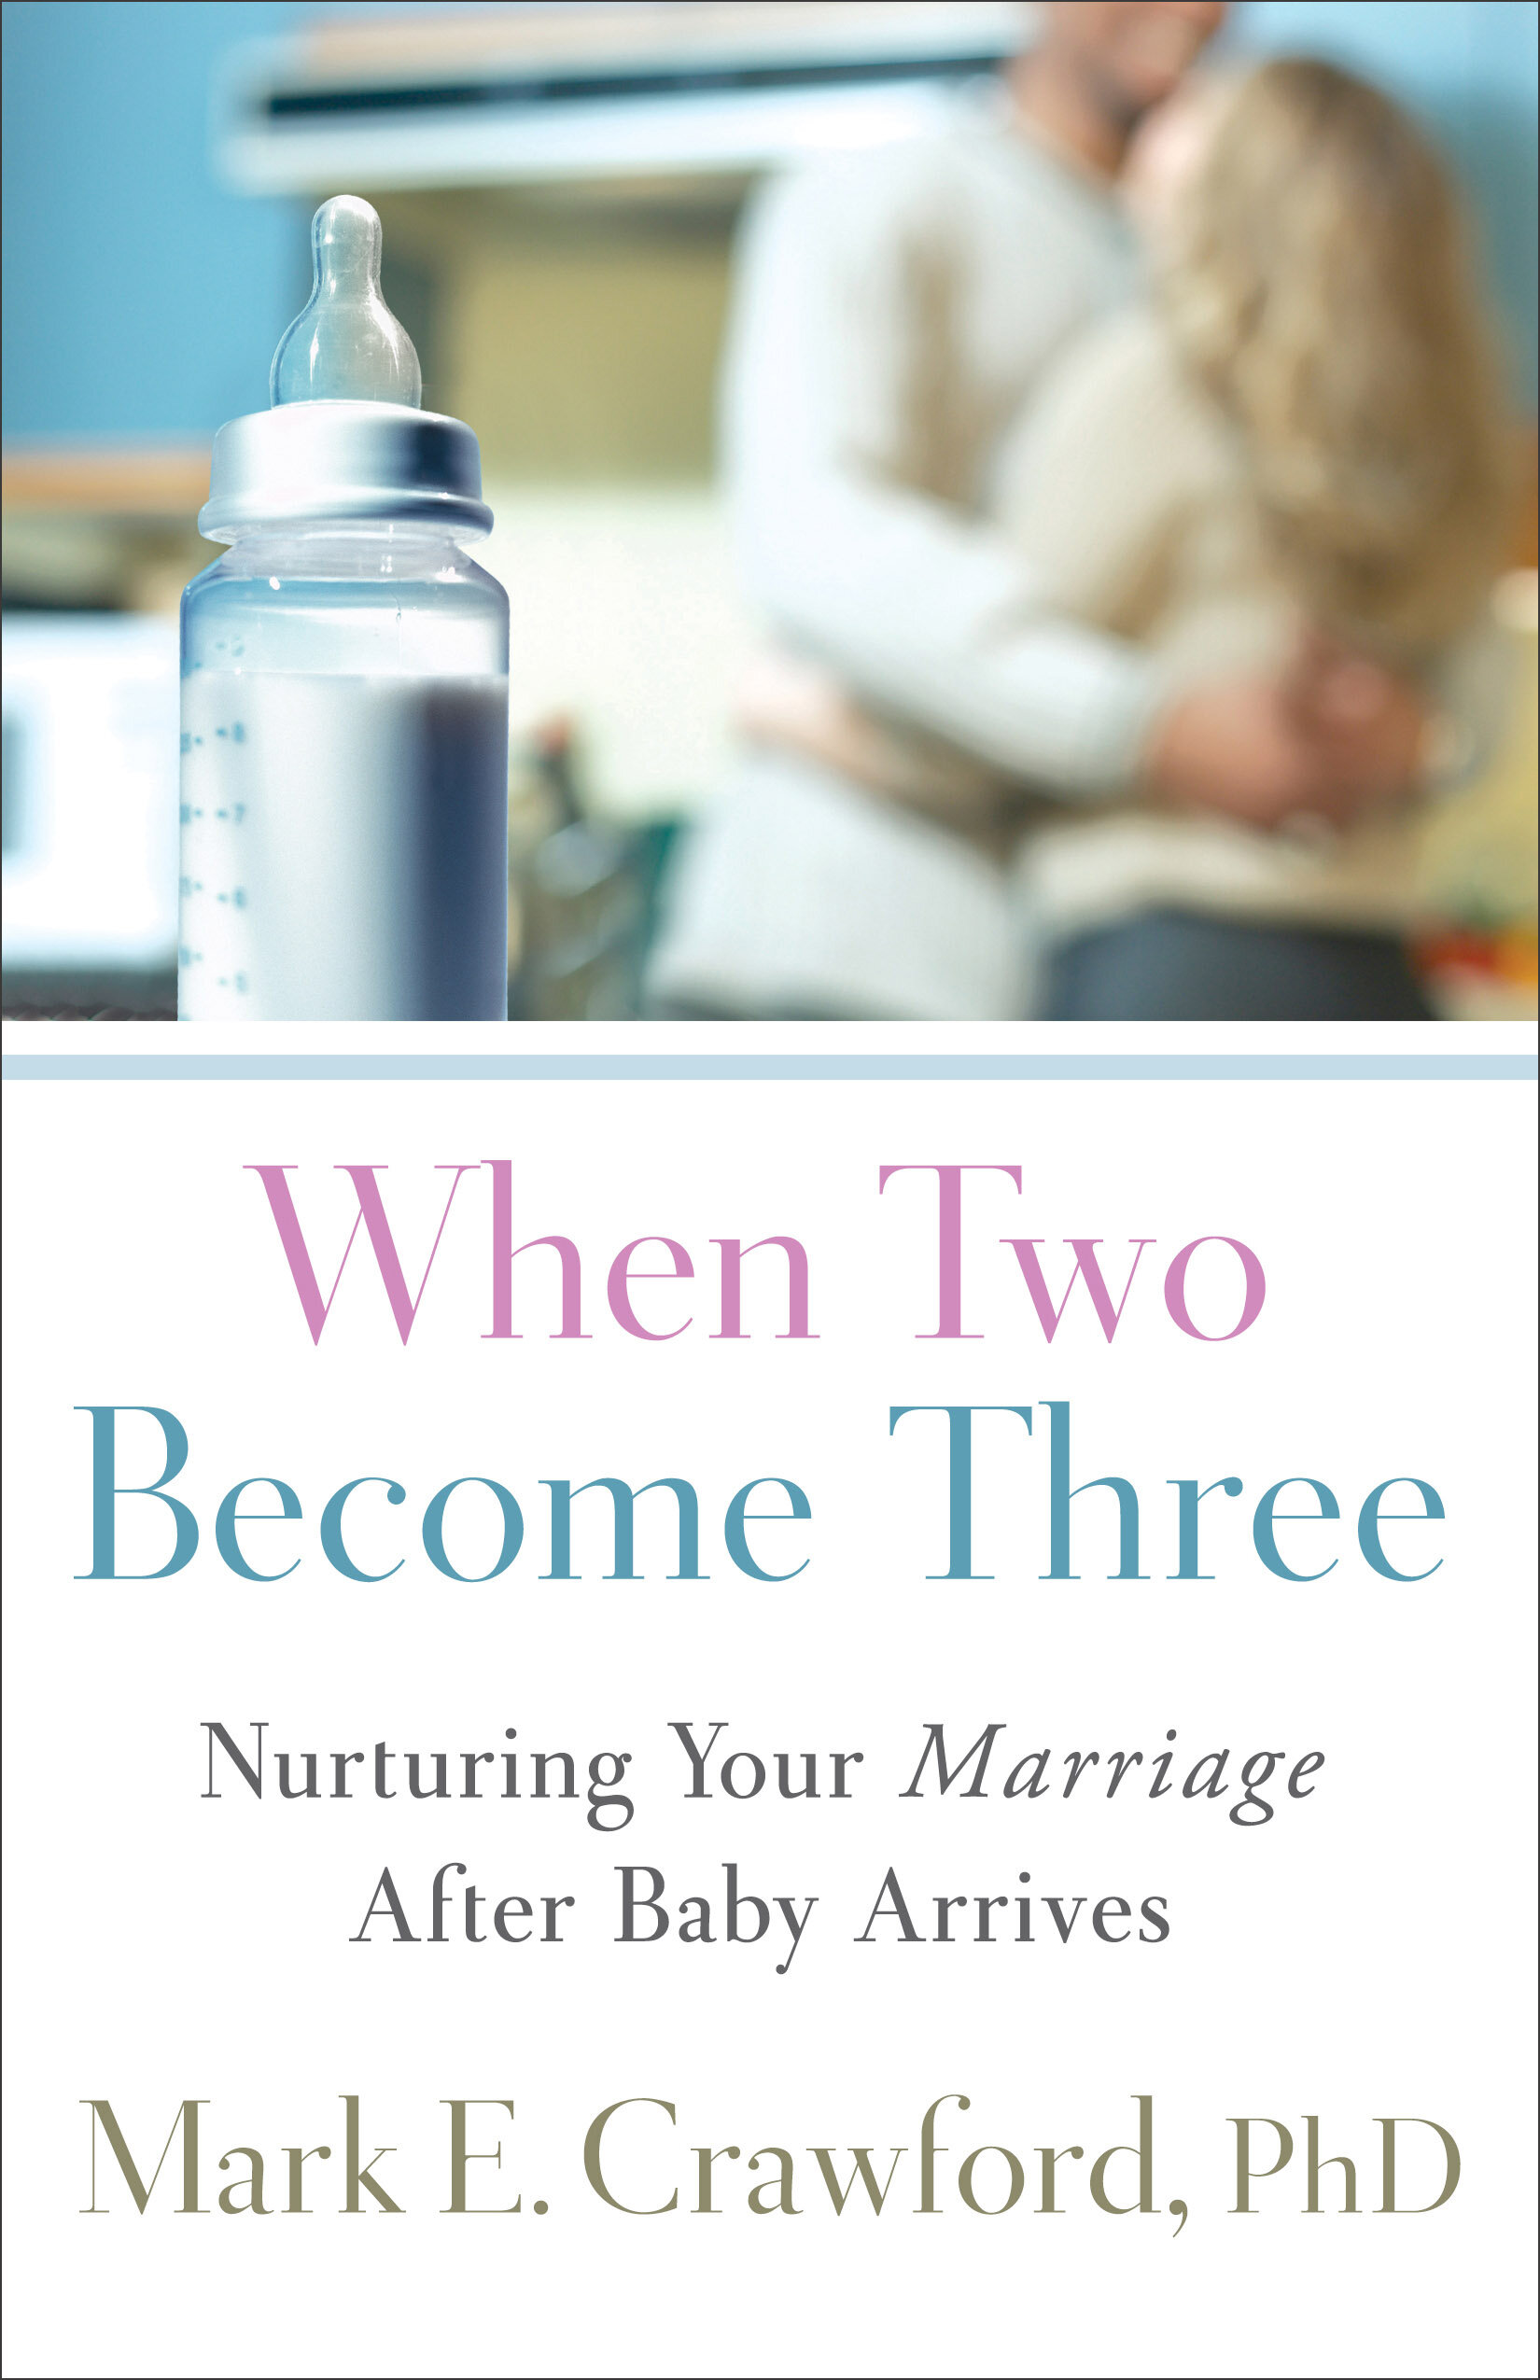 When Two Become Three: Nurturing Your Marriage After Baby Arrives